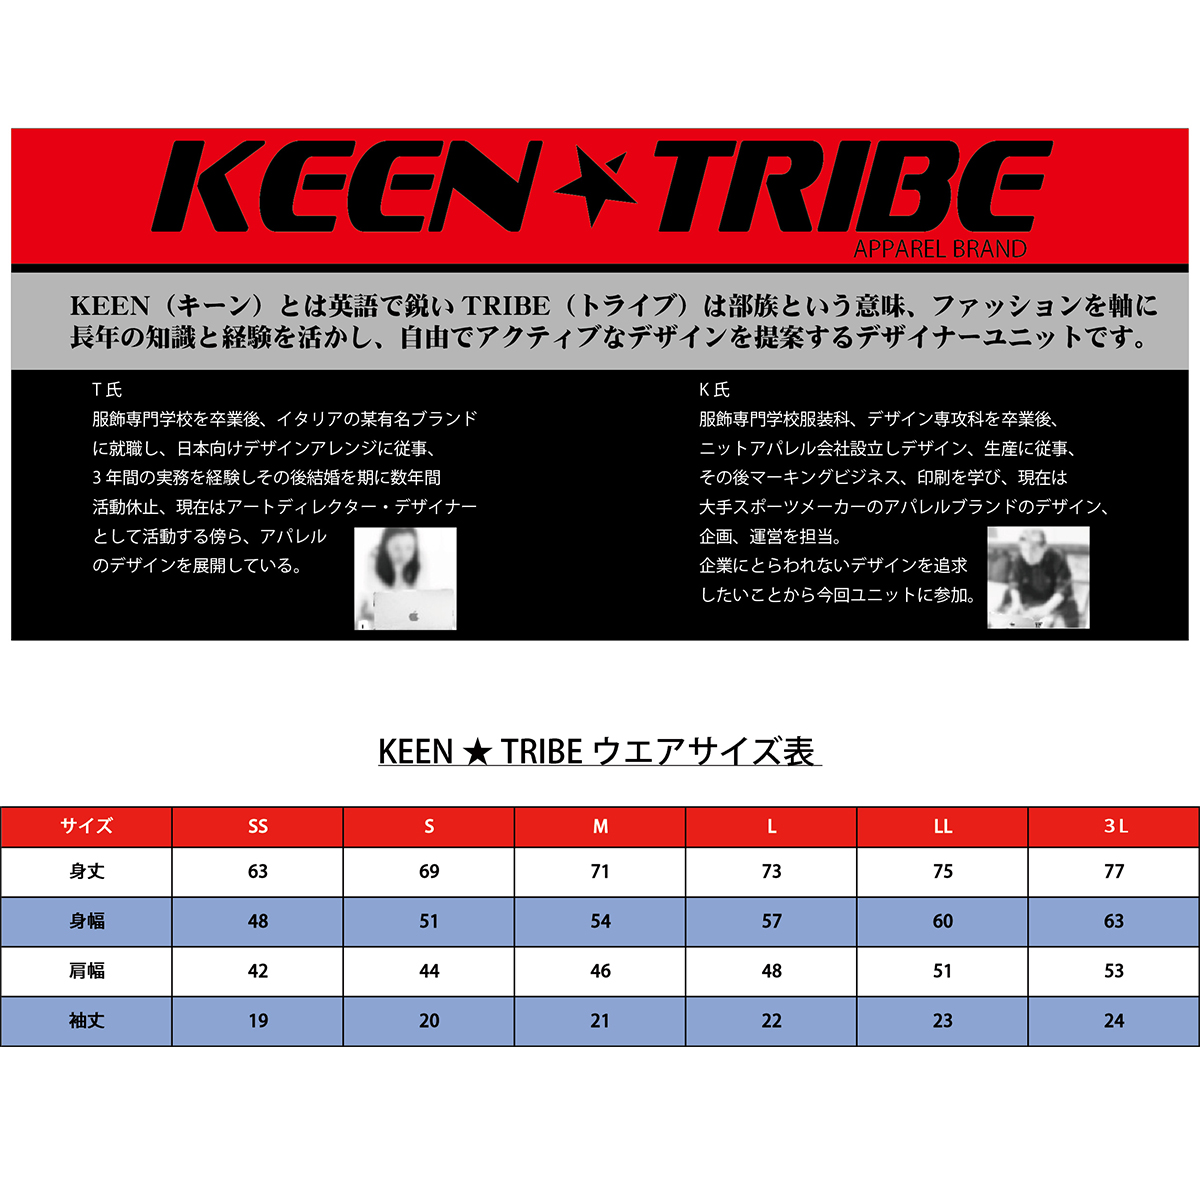 KEEN ★ TRIBE　KT-38(受注生産)